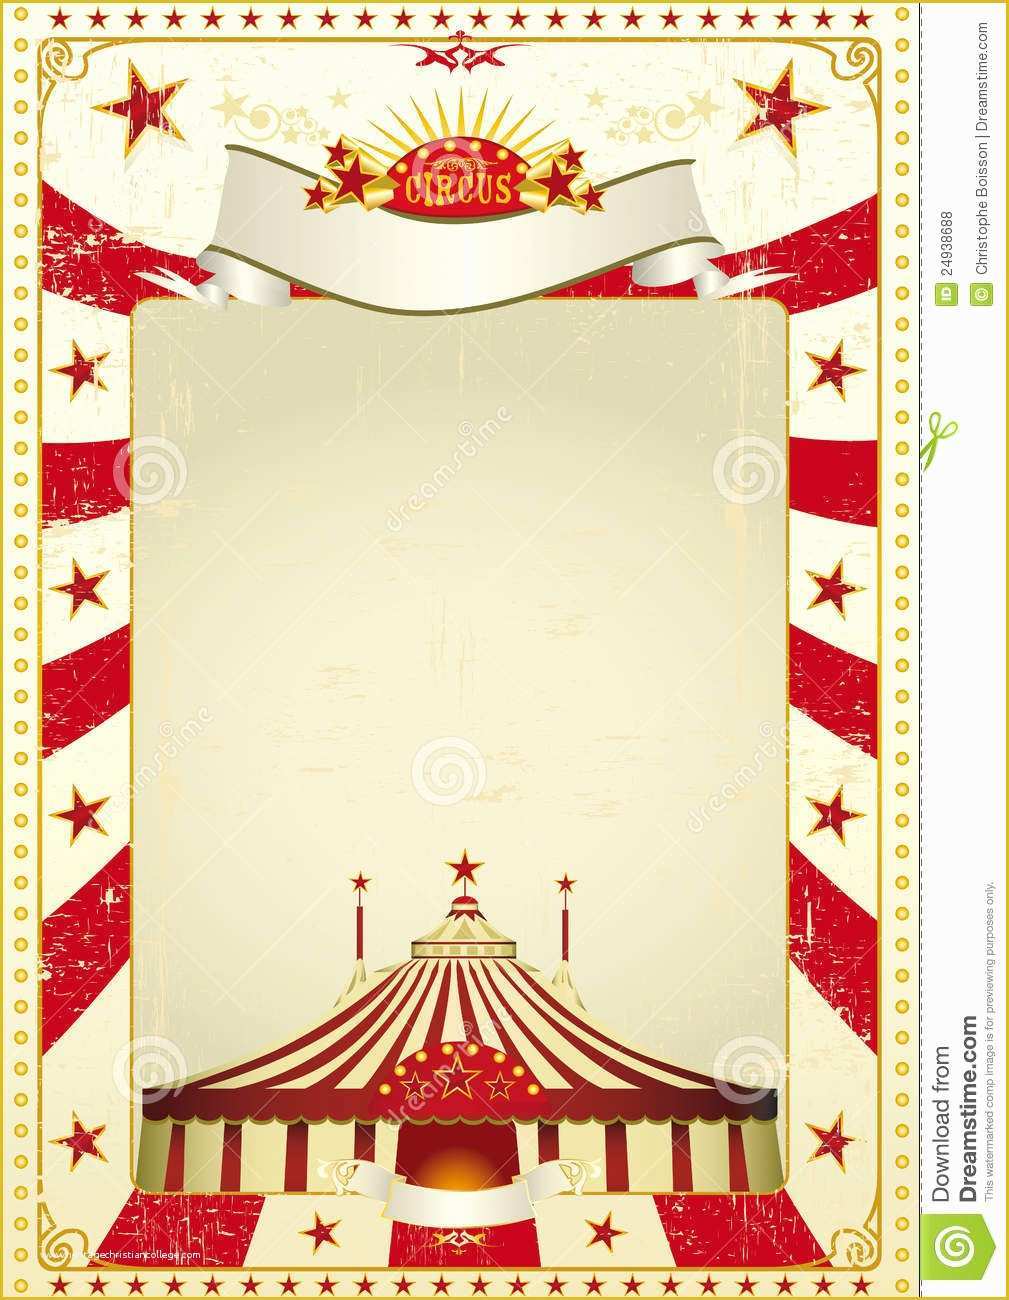 Circus Poster Template Free Download Of Used Poster Circus Stock Vector Illustration Of Cabaret